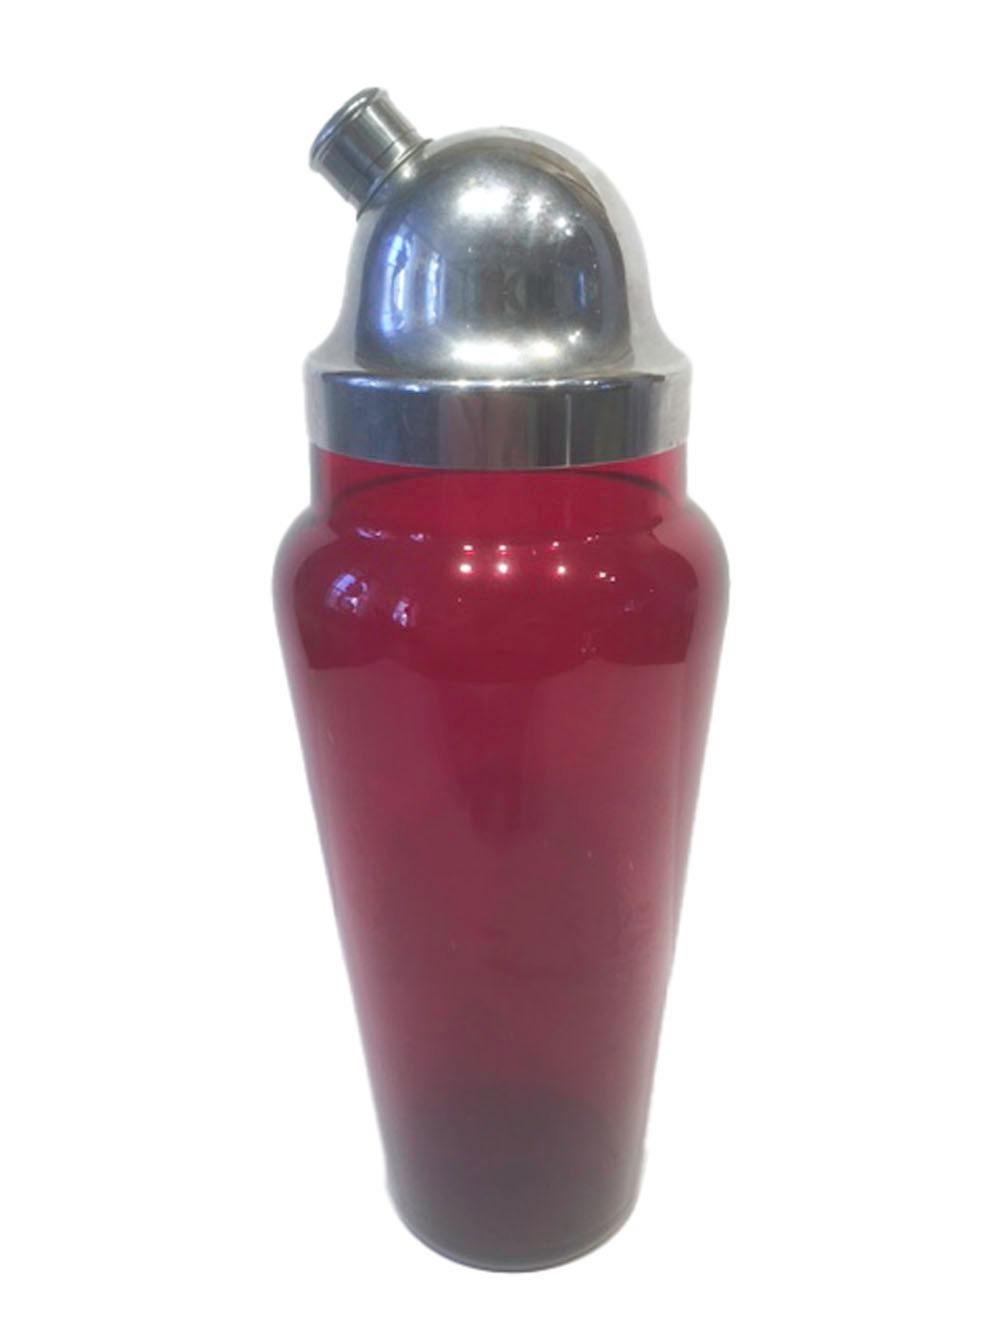 Art Deco ruby red glass cocktail shaker with a domed chrome lid having a pour spout with built in strainer. The body of the shaker tapers down from the rounded shoulder, The chrome lid fits snuggly to the neck of the shaker.